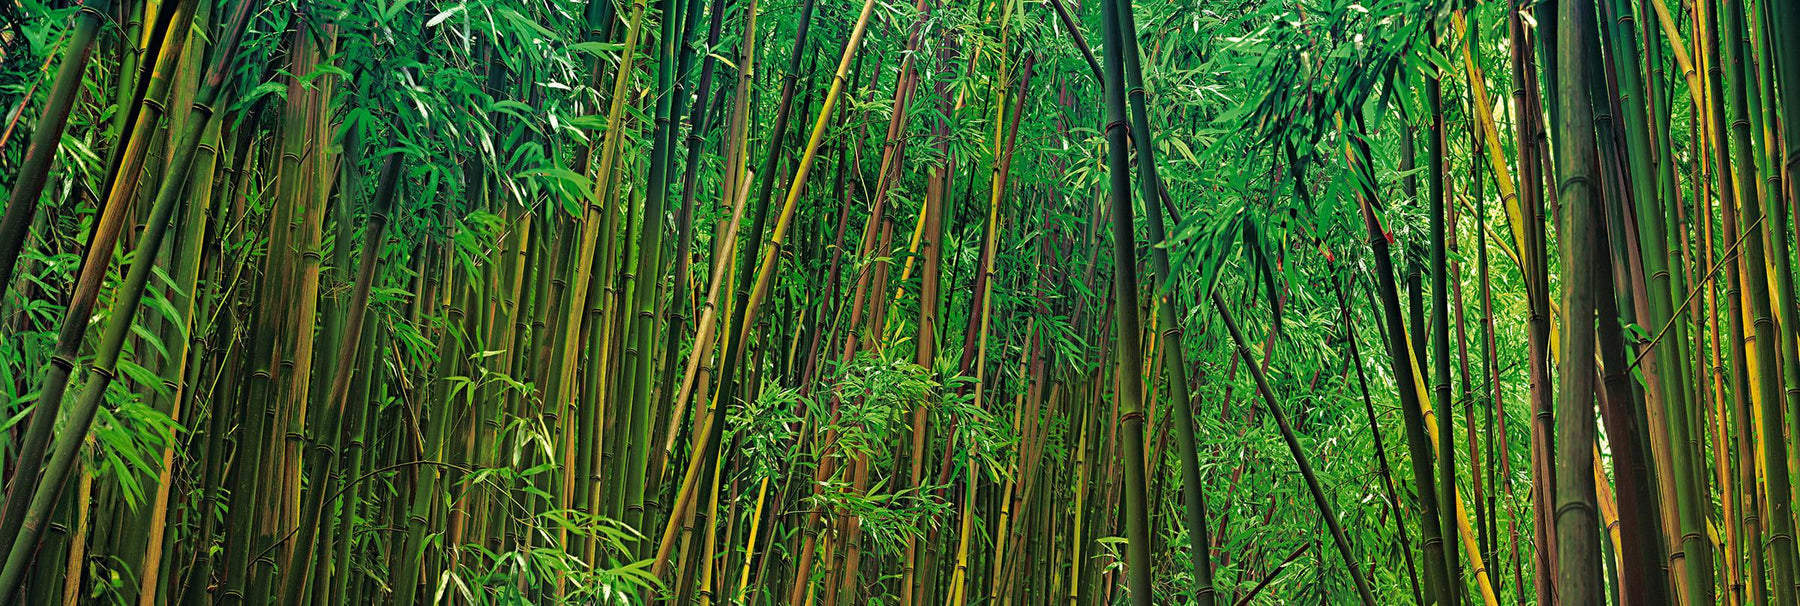 Walls of green and yellow bamboo in the rainforest of Hana Hawaii